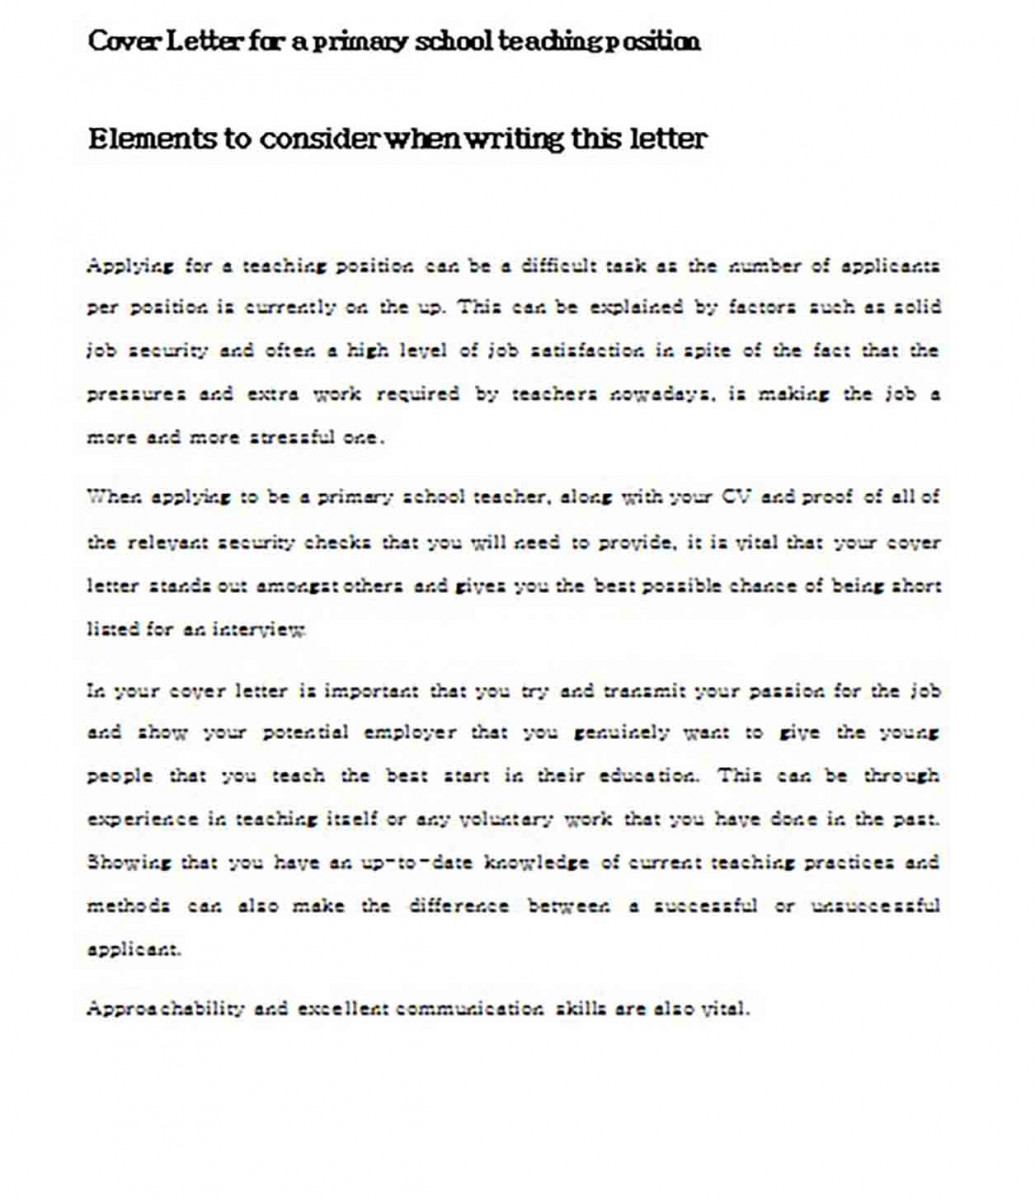 Cover Letter for a Primary School Teaching Position